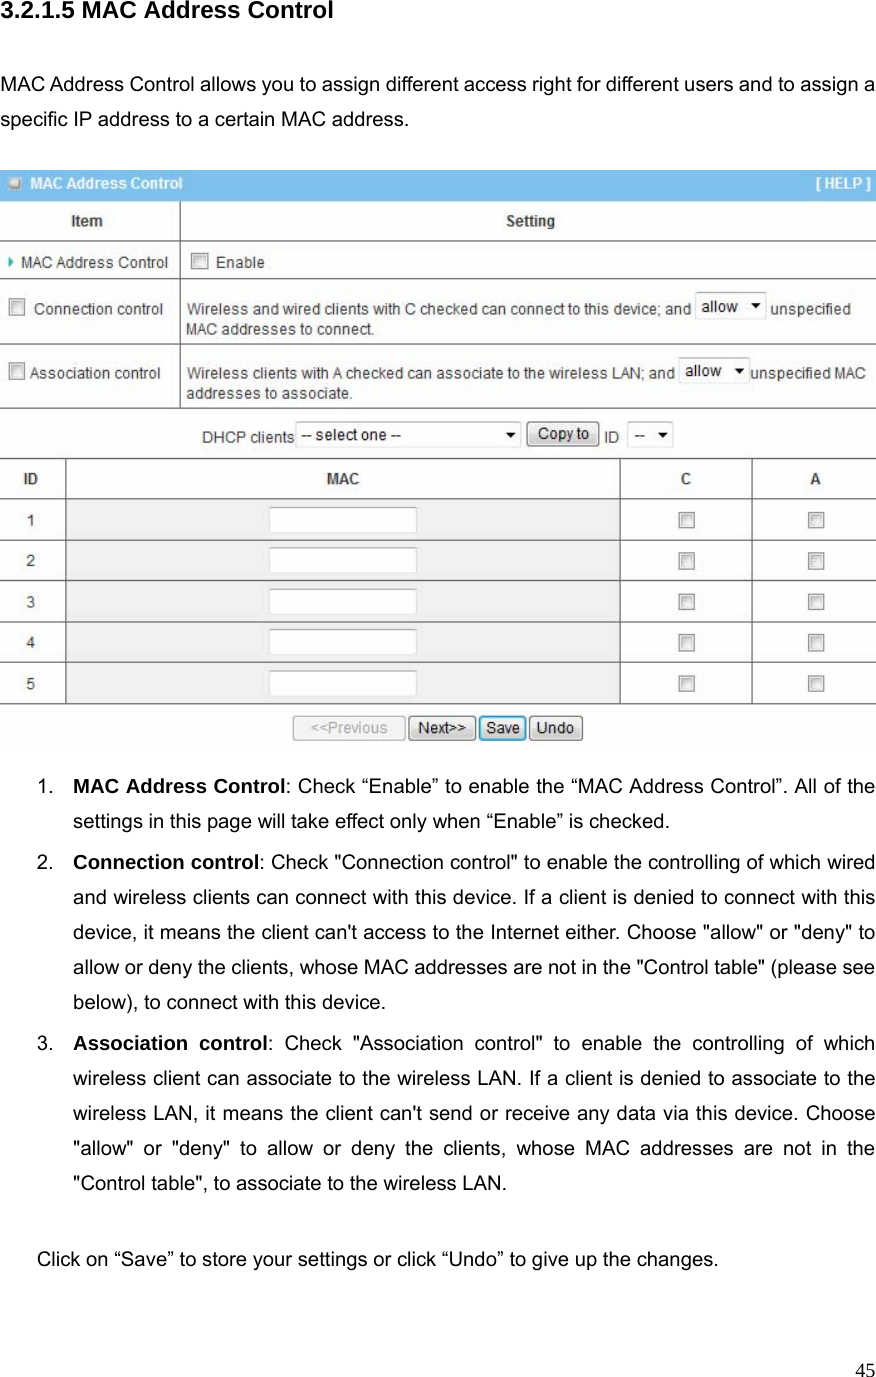  453.2.1.5 MAC Address Control   MAC Address Control allows you to assign different access right for different users and to assign a specific IP address to a certain MAC address.    1.  MAC Address Control: Check “Enable” to enable the “MAC Address Control”. All of the settings in this page will take effect only when “Enable” is checked. 2.  Connection control: Check &quot;Connection control&quot; to enable the controlling of which wired and wireless clients can connect with this device. If a client is denied to connect with this device, it means the client can&apos;t access to the Internet either. Choose &quot;allow&quot; or &quot;deny&quot; to allow or deny the clients, whose MAC addresses are not in the &quot;Control table&quot; (please see below), to connect with this device. 3.  Association control: Check &quot;Association control&quot; to enable the controlling of which wireless client can associate to the wireless LAN. If a client is denied to associate to the wireless LAN, it means the client can&apos;t send or receive any data via this device. Choose &quot;allow&quot; or &quot;deny&quot; to allow or deny the clients, whose MAC addresses are not in the &quot;Control table&quot;, to associate to the wireless LAN.  Click on “Save” to store your settings or click “Undo” to give up the changes.  